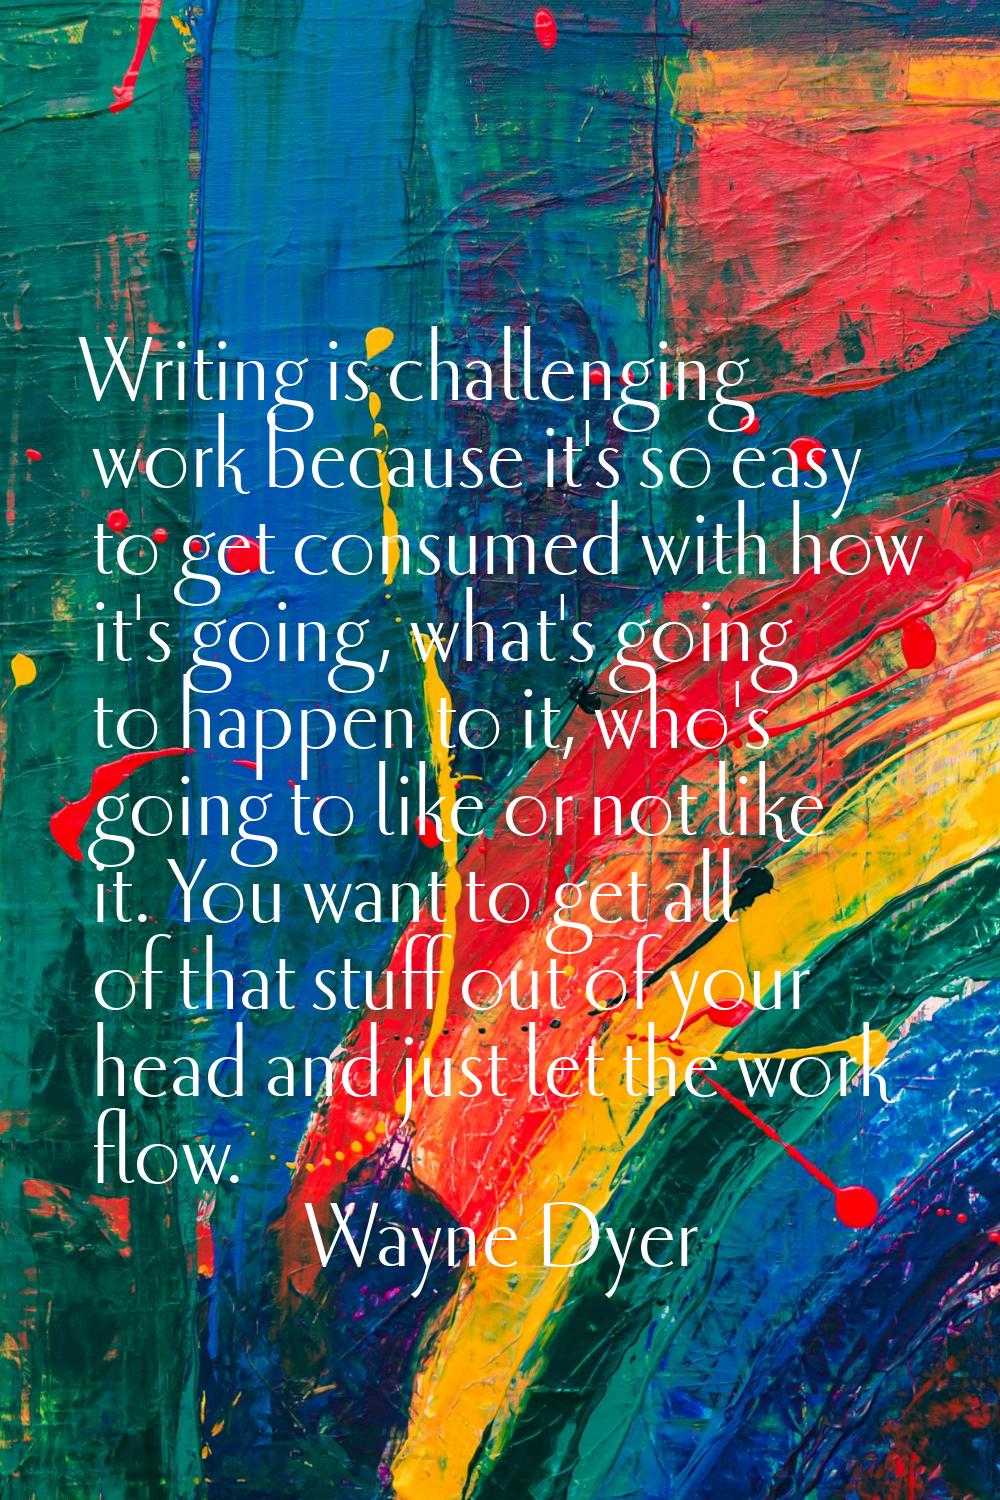 Writing is challenging work because it's so easy to get consumed with how it's going, what's going 